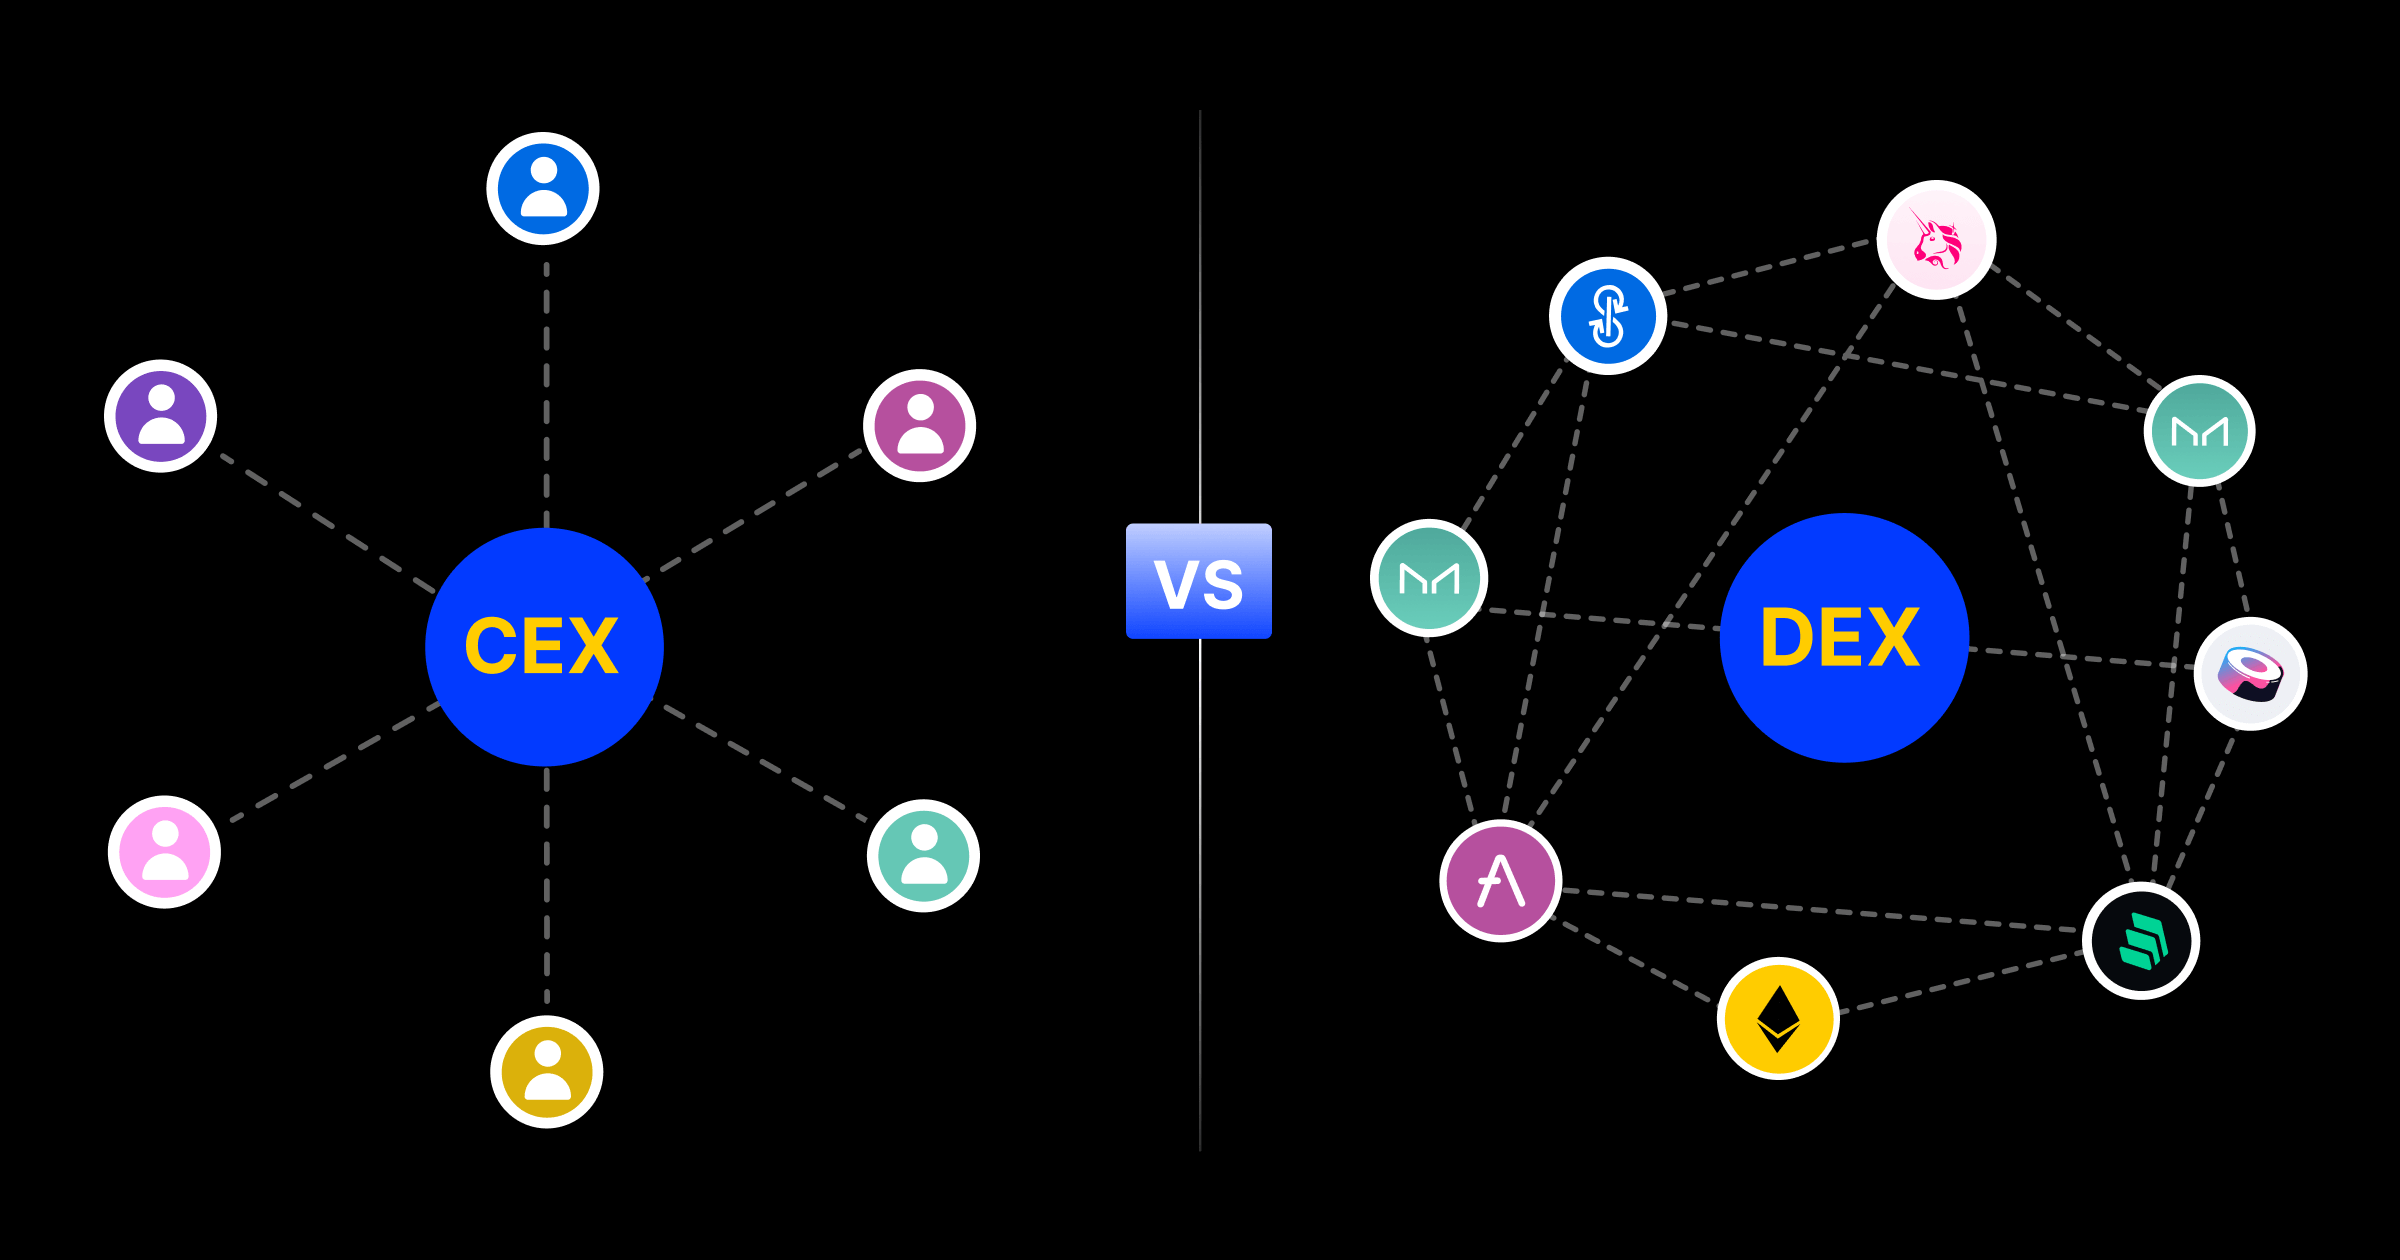 CEX Vs. DEX - What Are the Key Differences? Explained